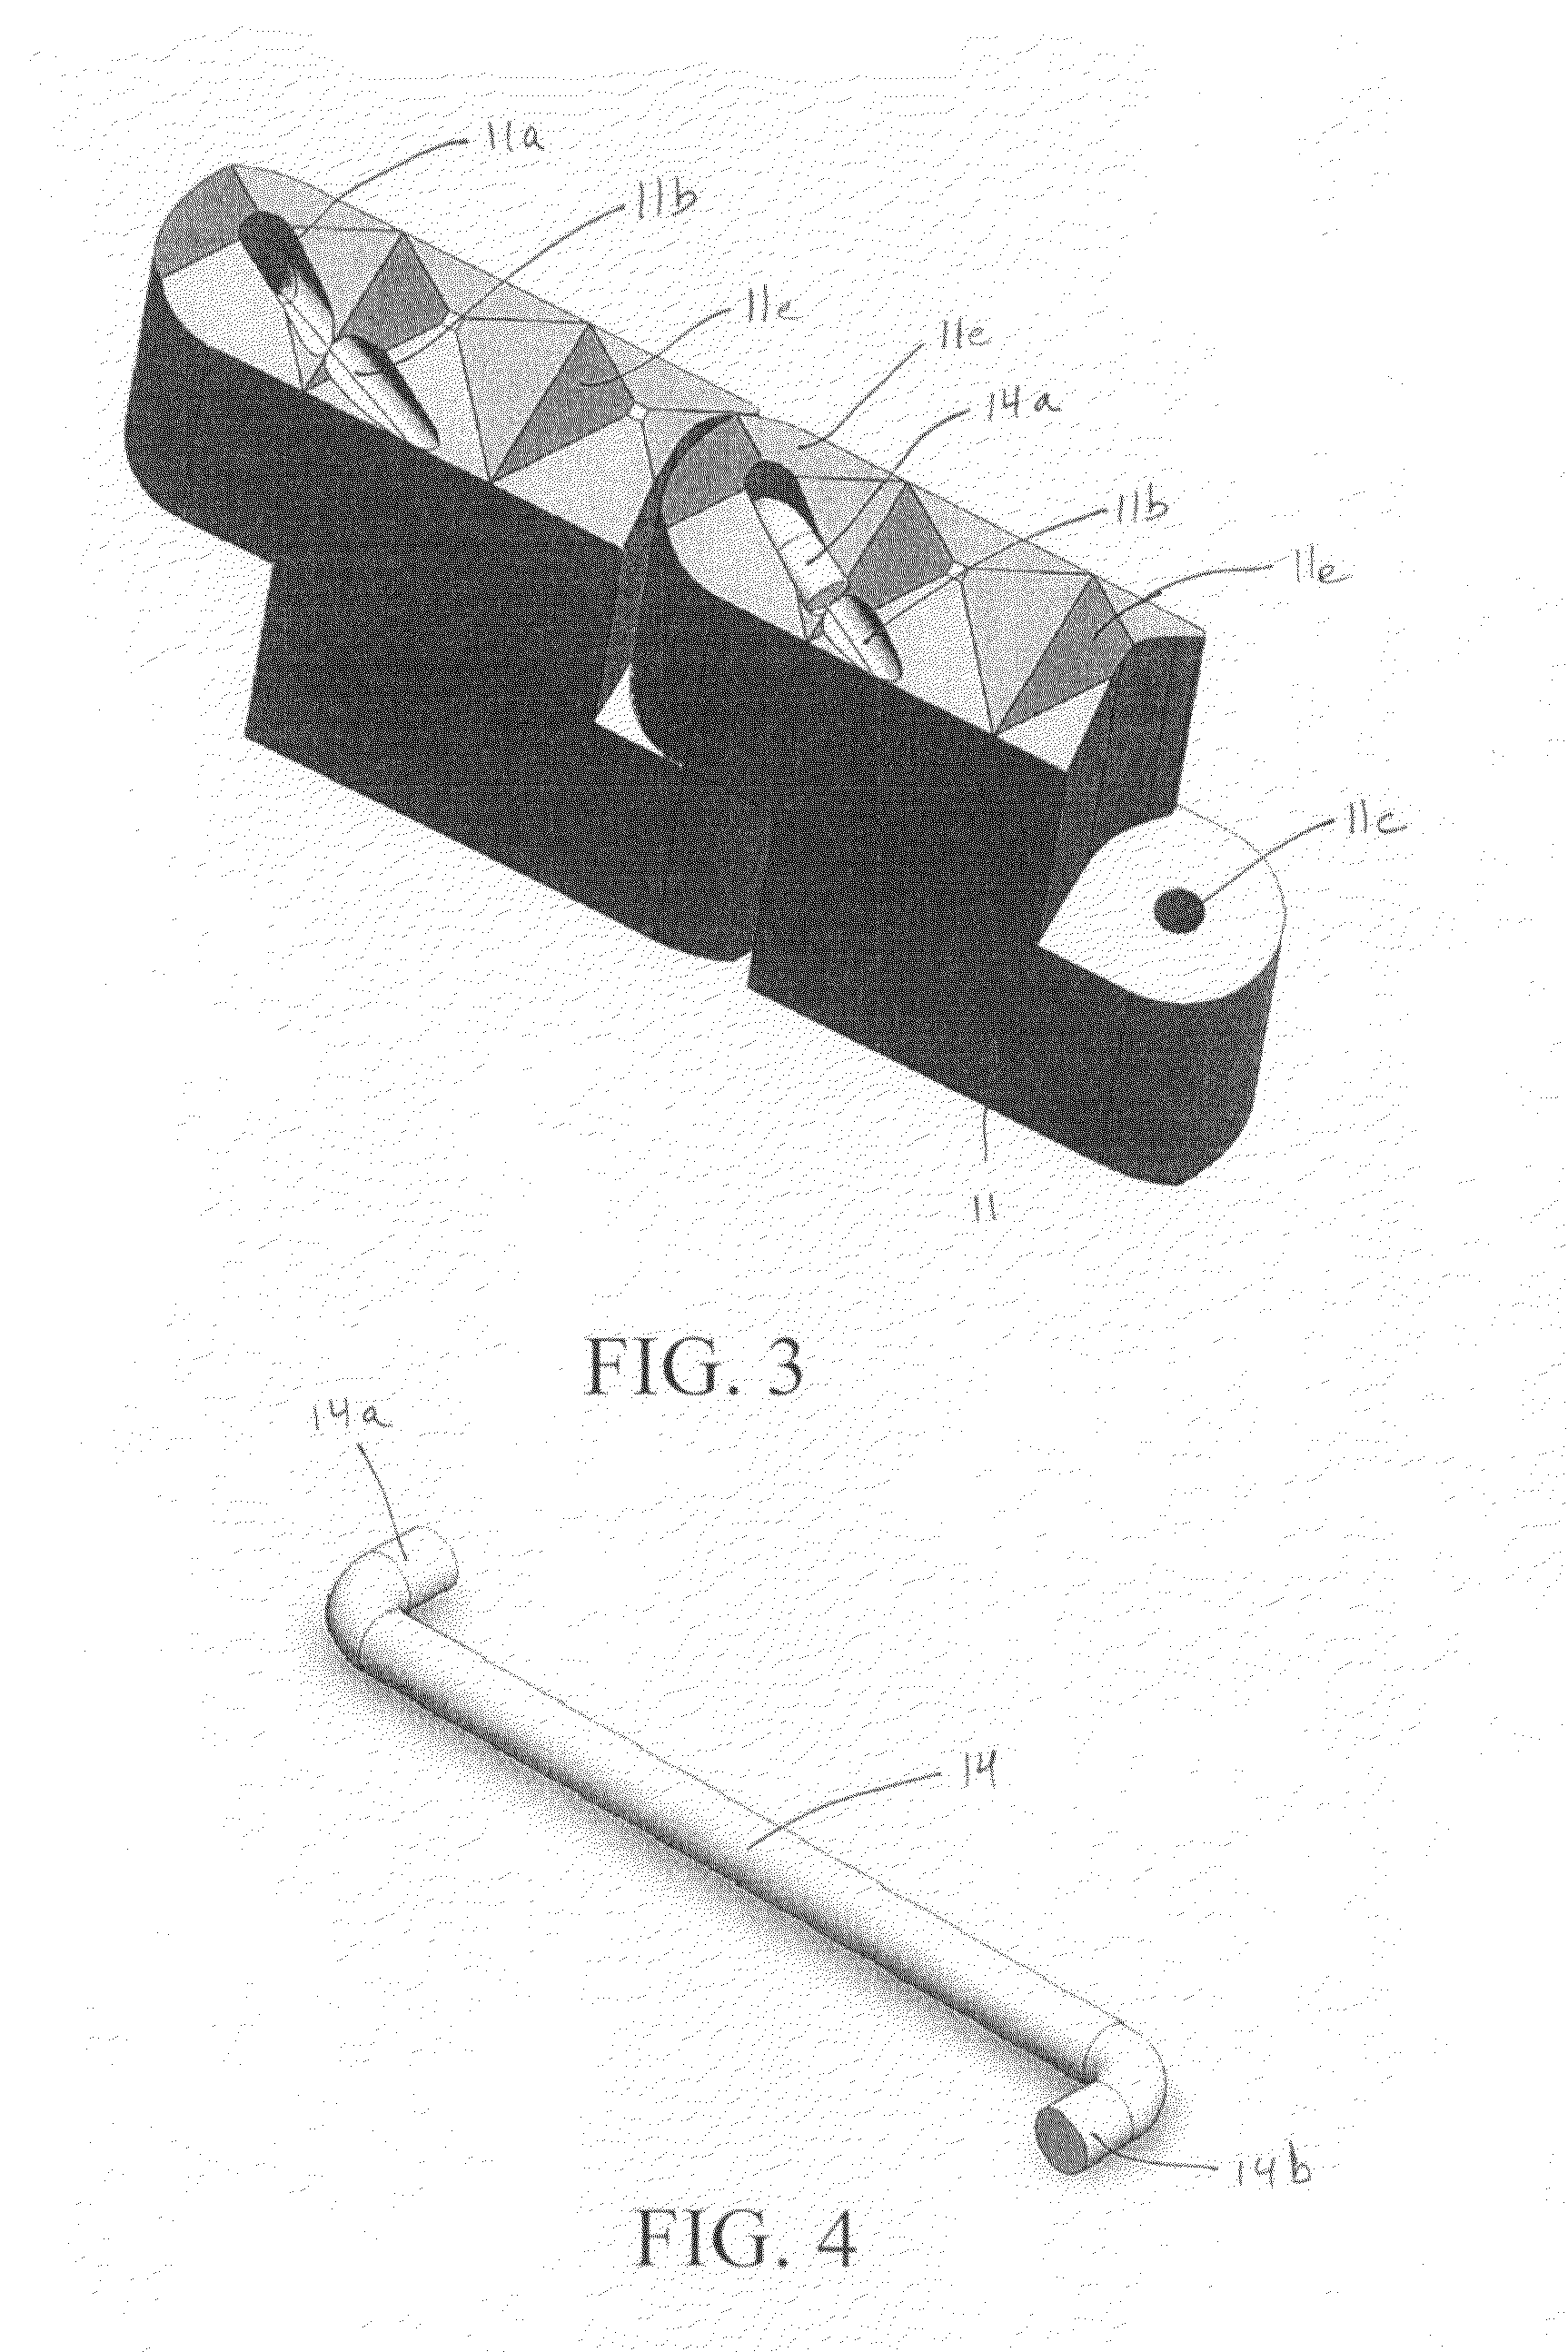 Expandable Inter-Vertebral Cage and Method of Installing Same